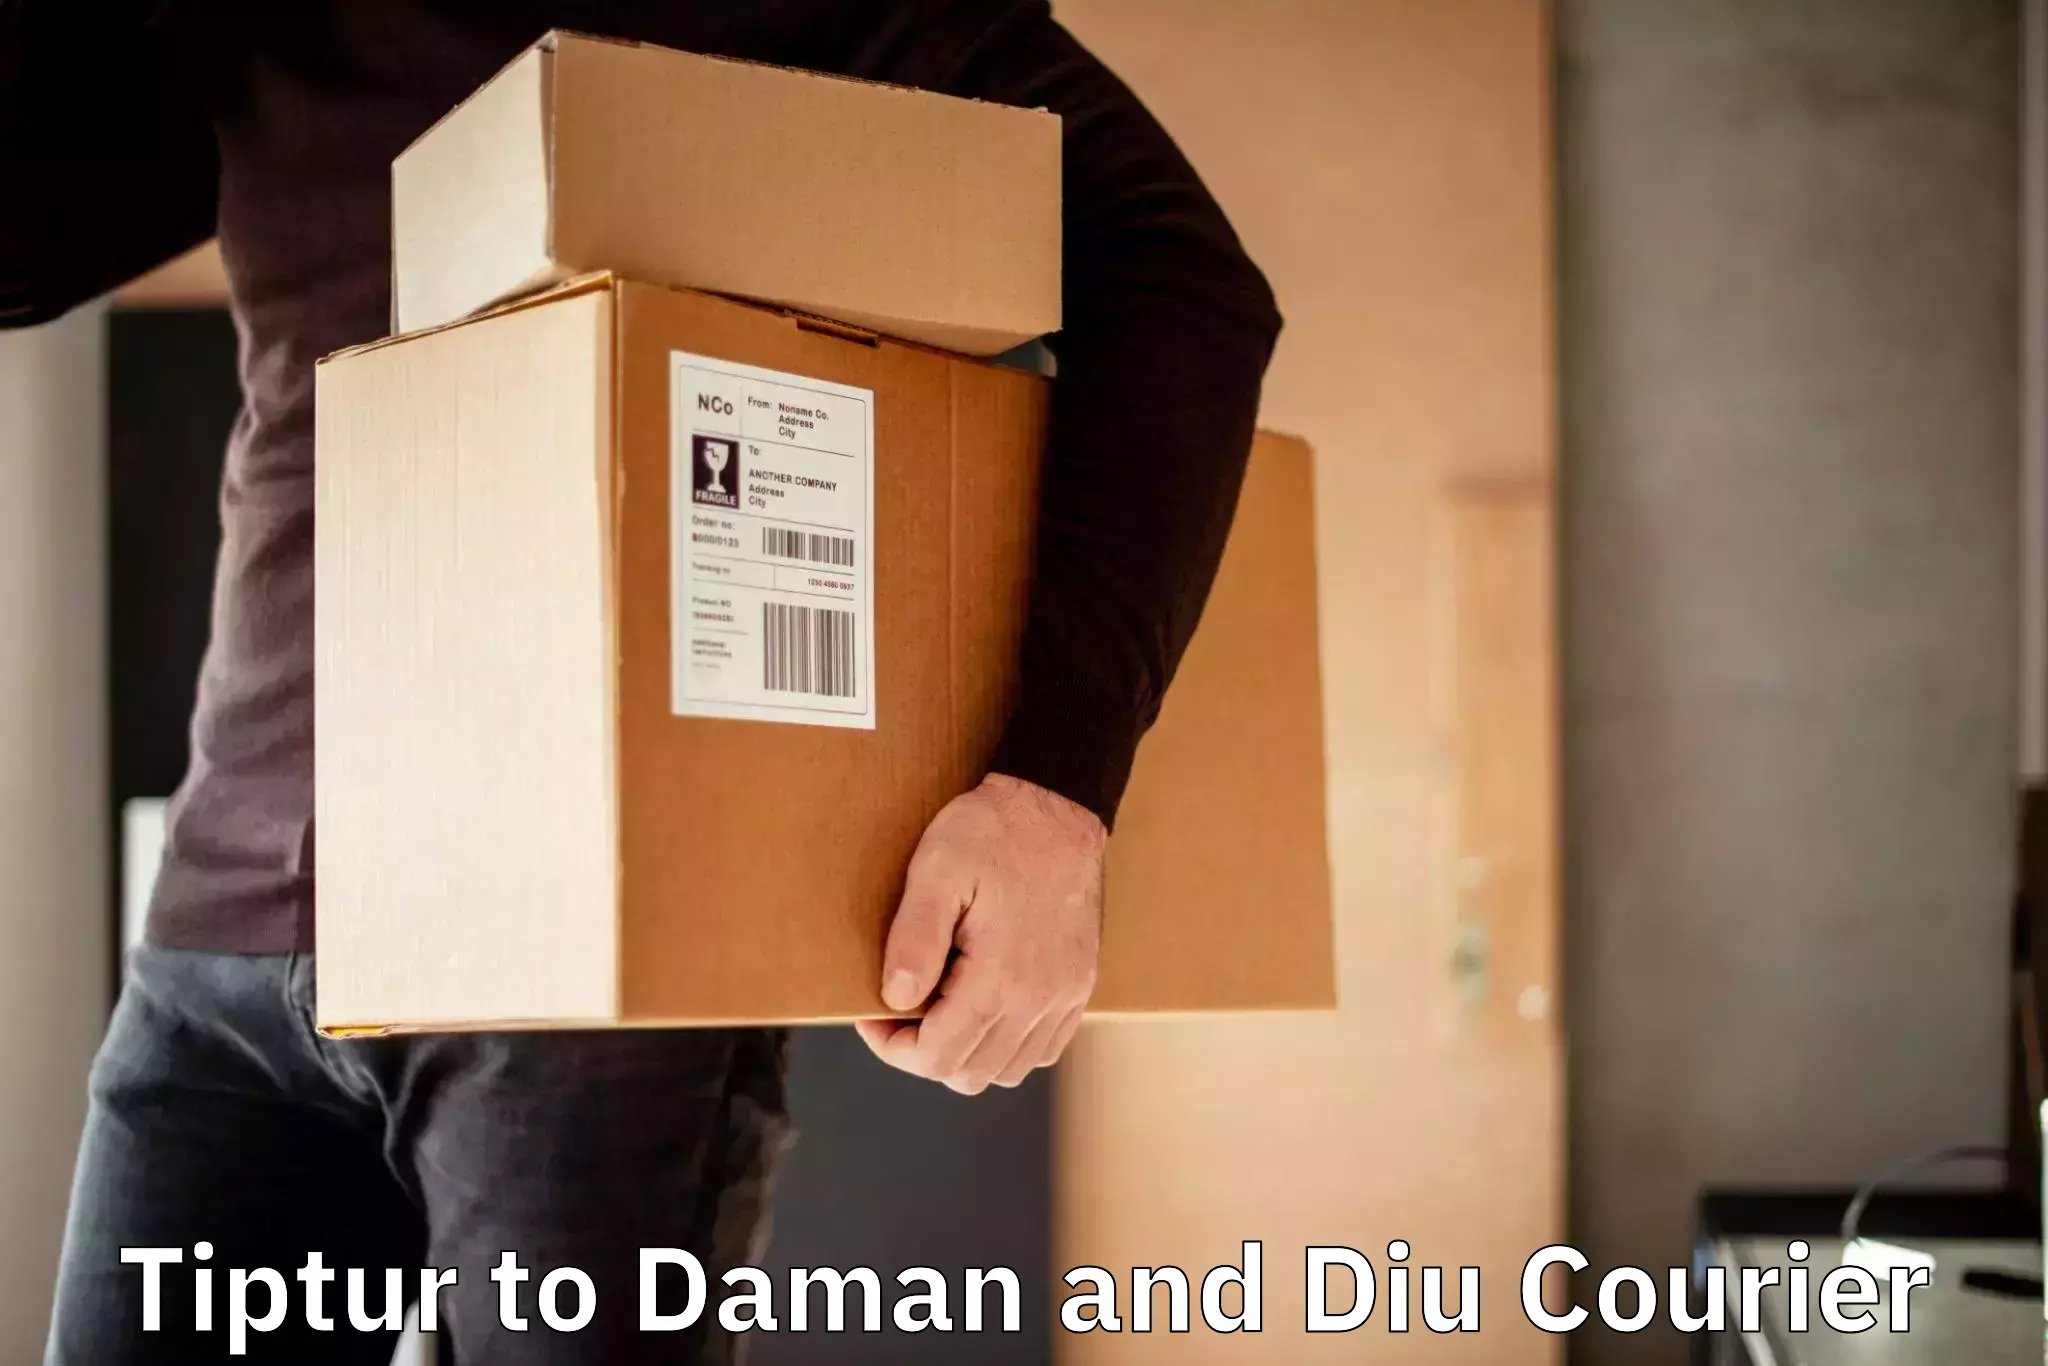 Nationwide courier service Tiptur to Daman and Diu